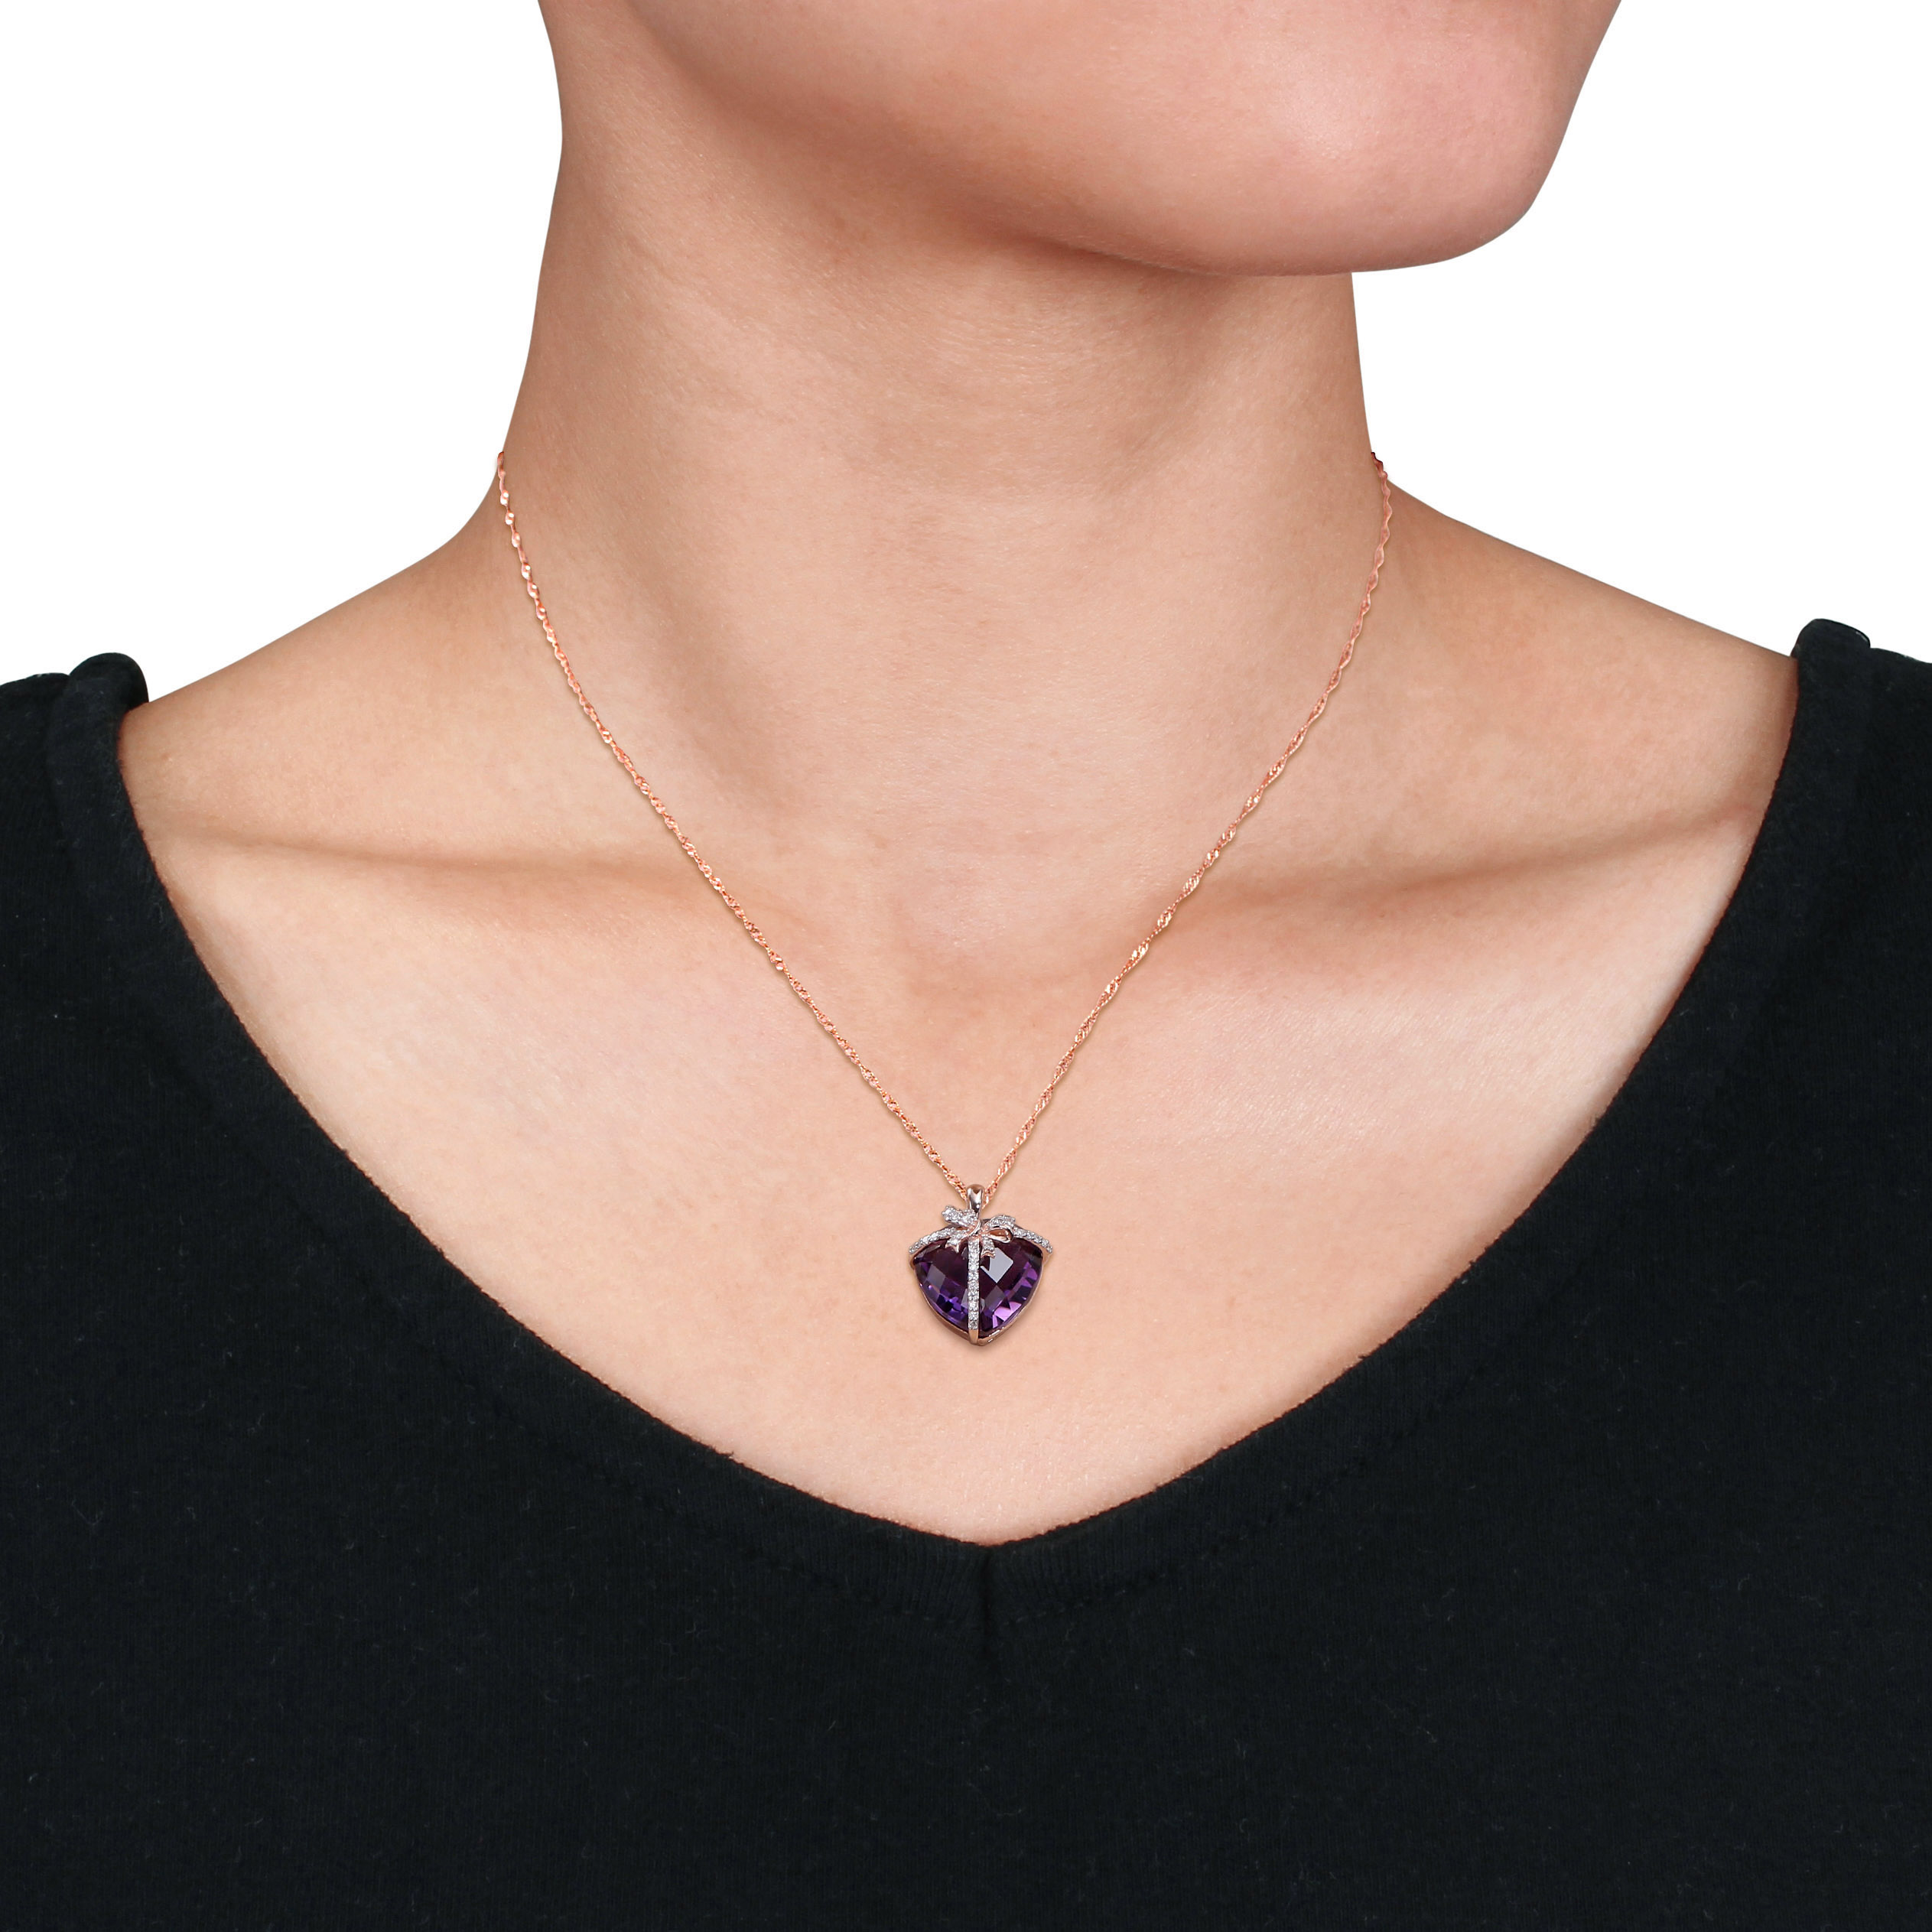 12 CT TGW Amethyst and 1/8 CT TDW Diamond Heart Pendant with Chain in 10k Rose Gold - 17 in.